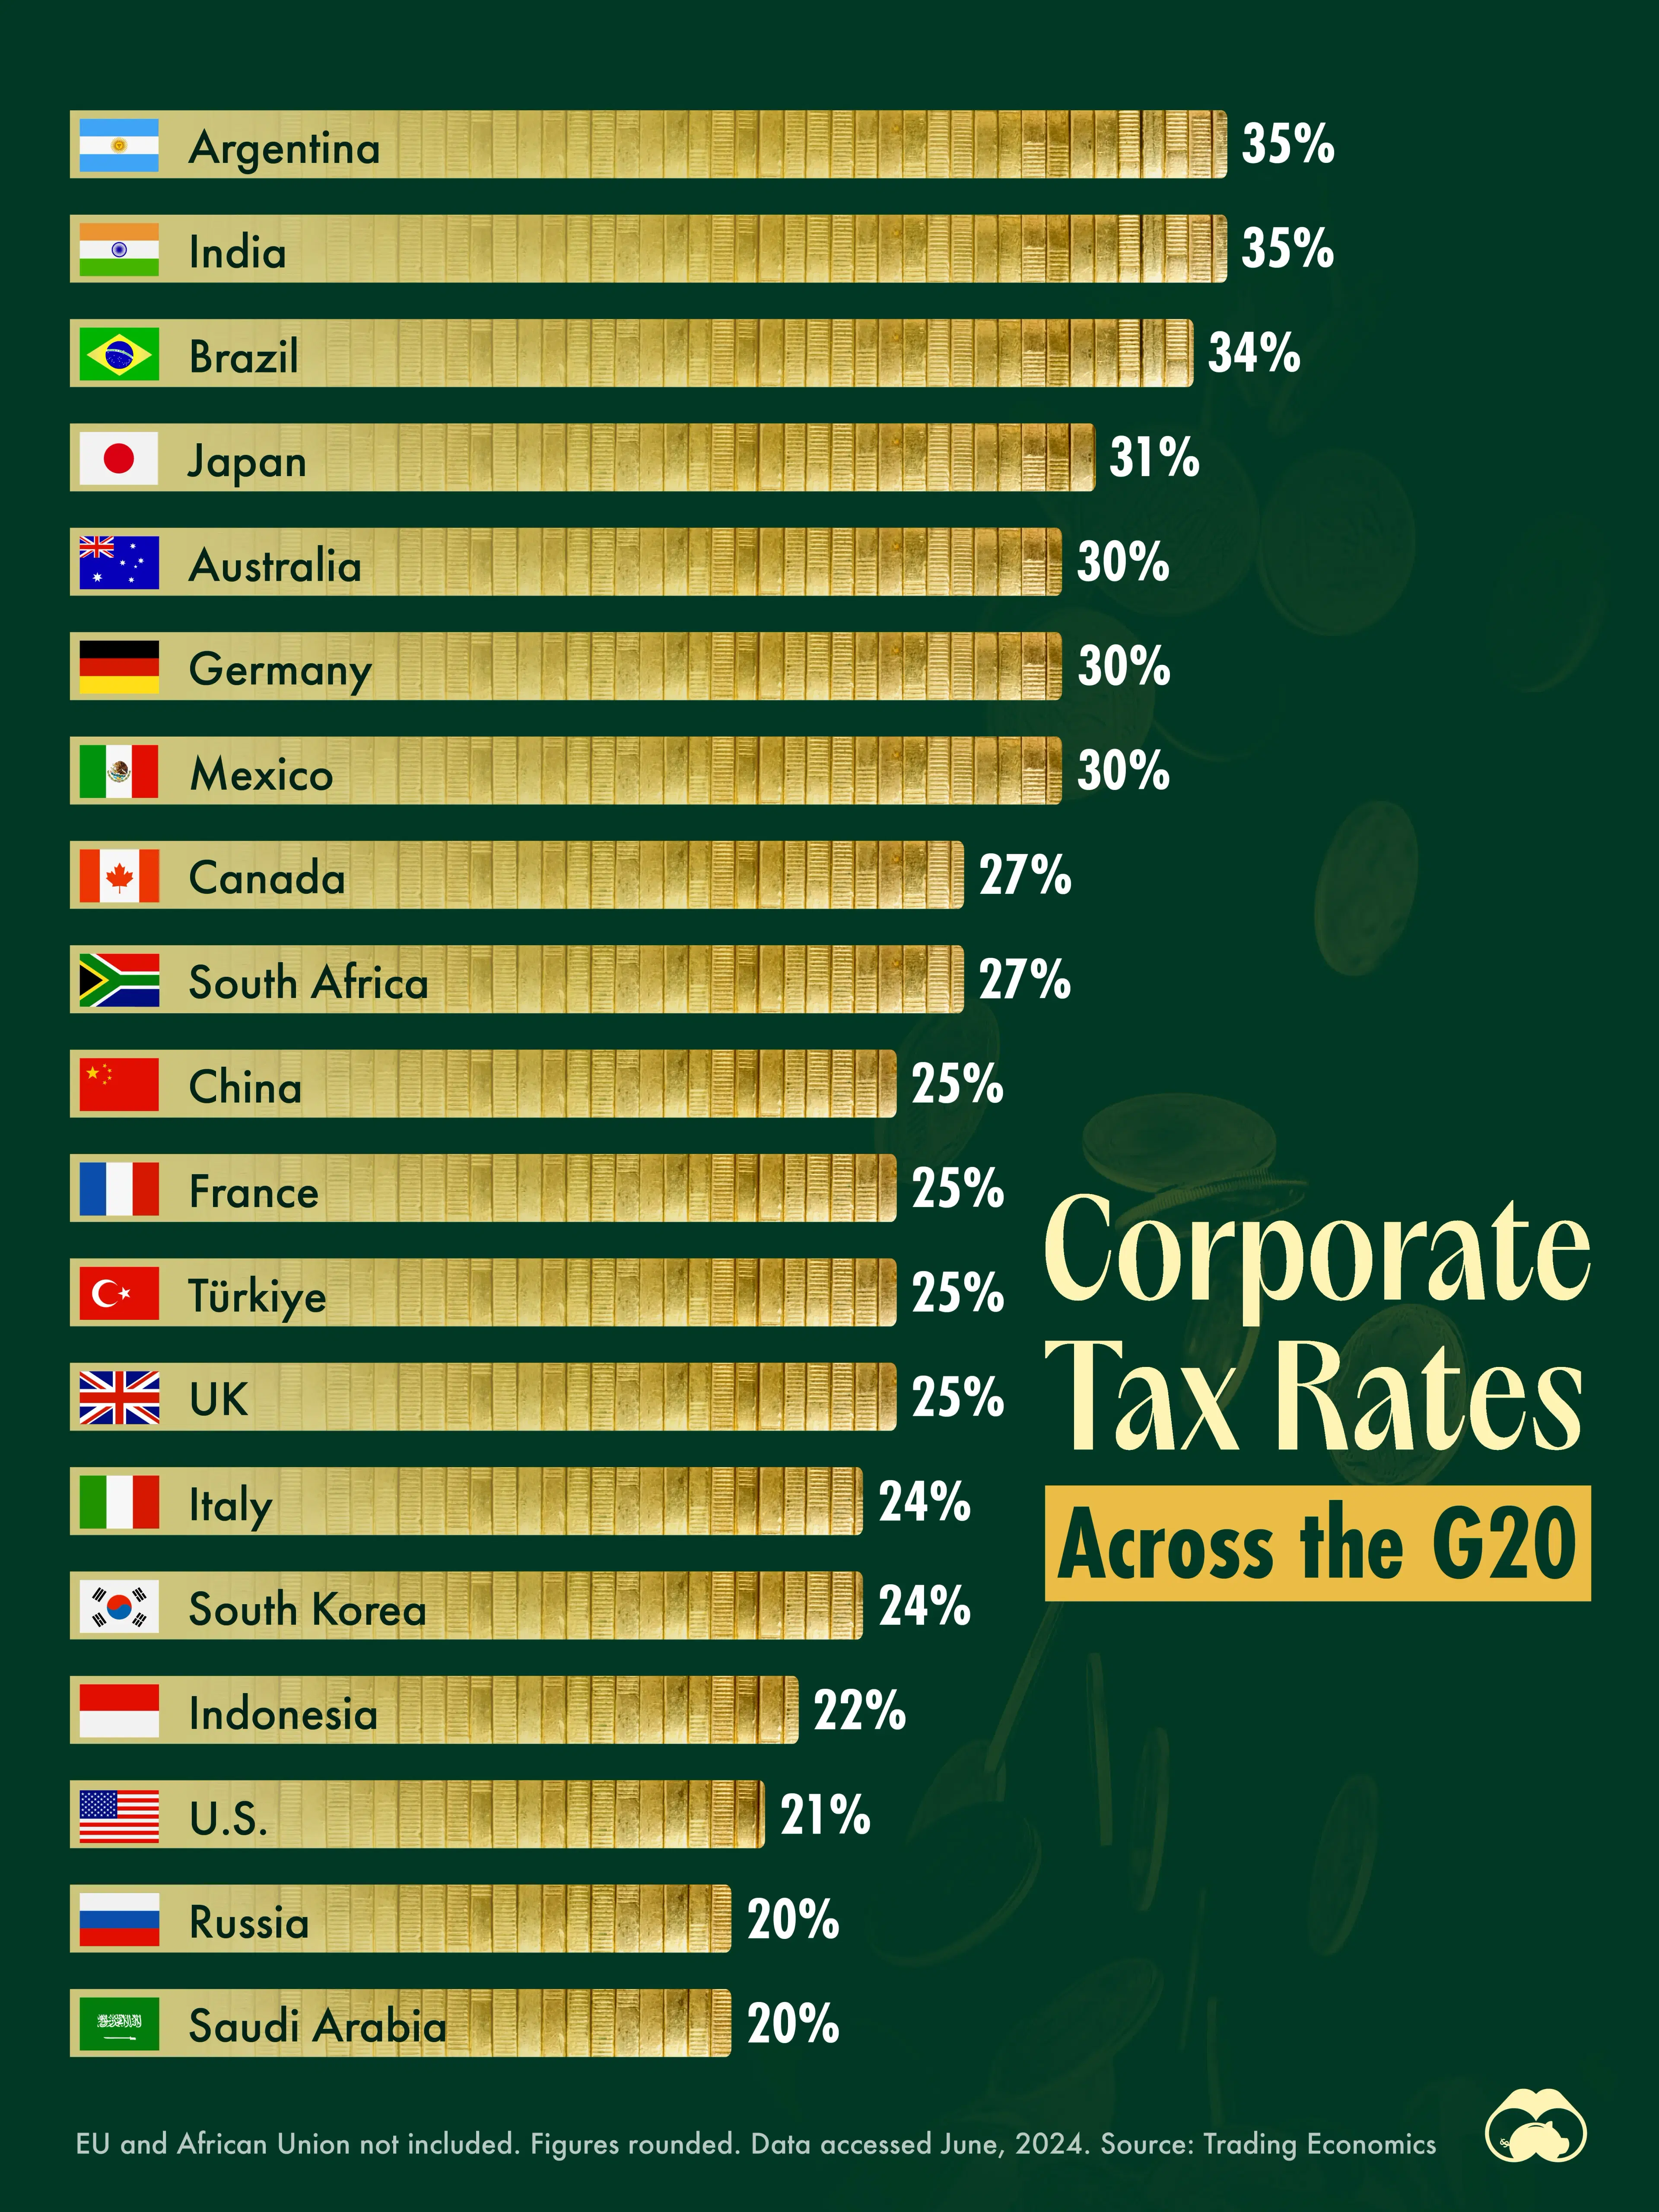 🇸🇦 Saudi Arabia & Russia Have the Lowest Corporate Taxes in the G20